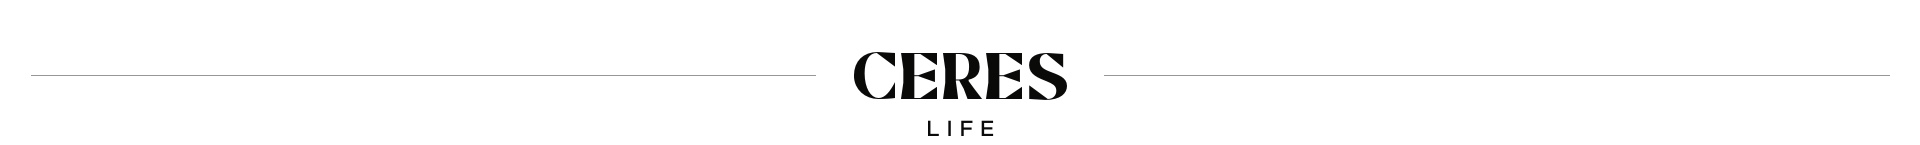 Ceres Life Information